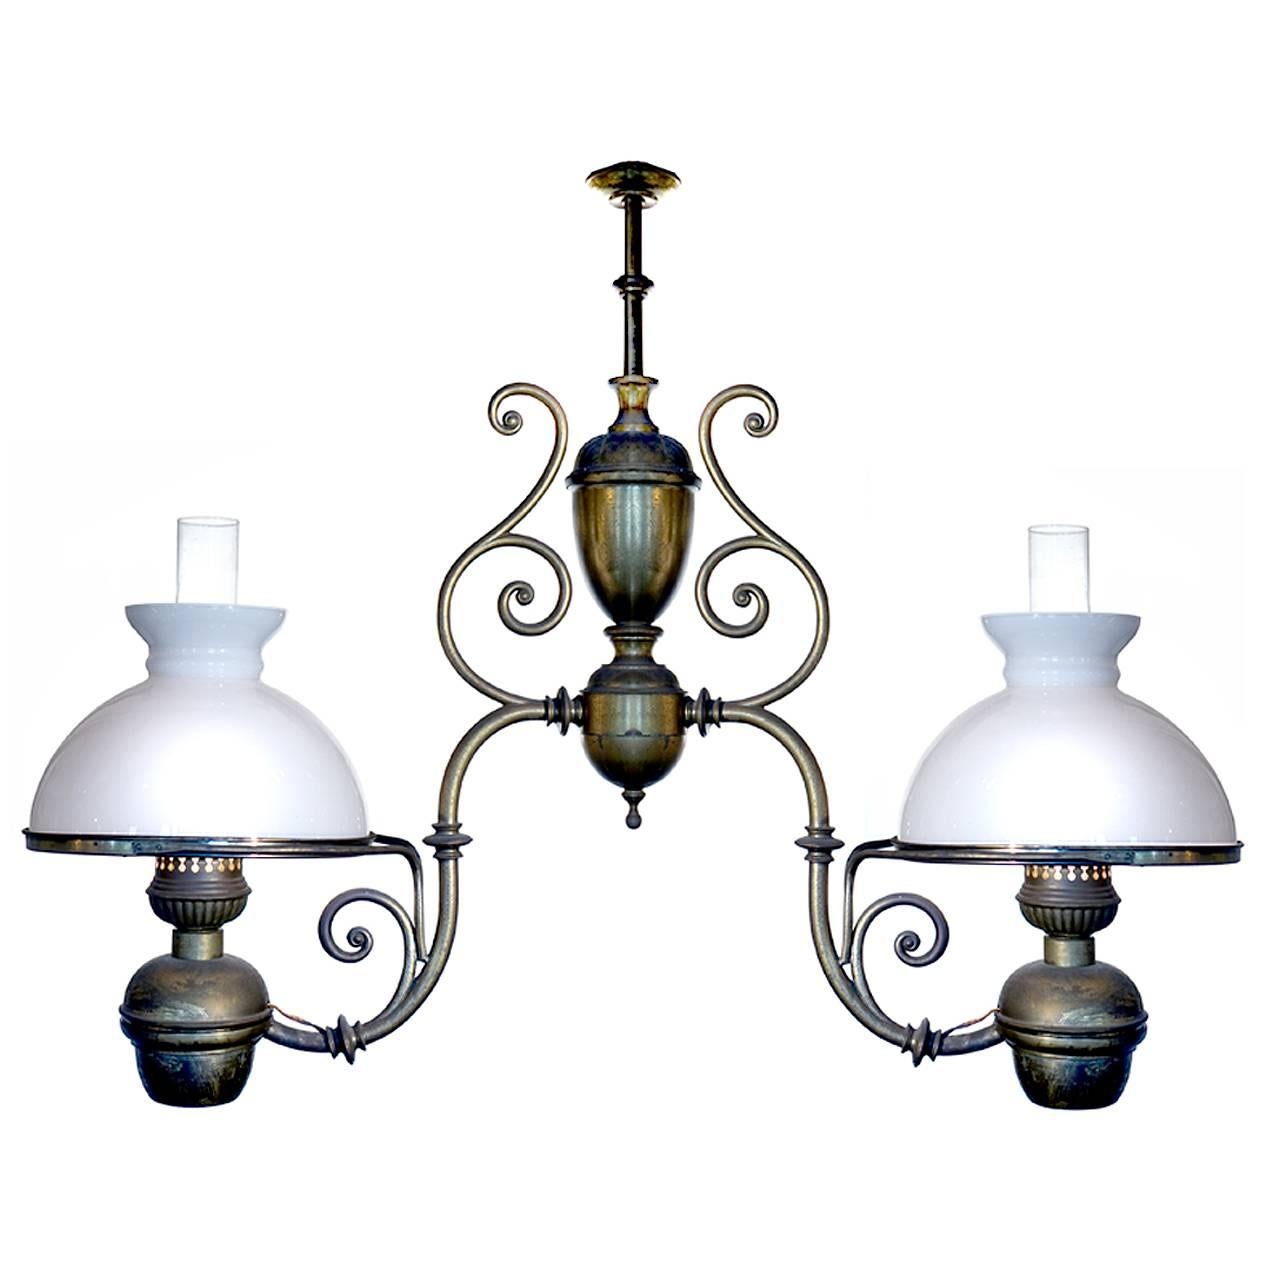 Large Double Arm Oil Lamp, Newly Electrified